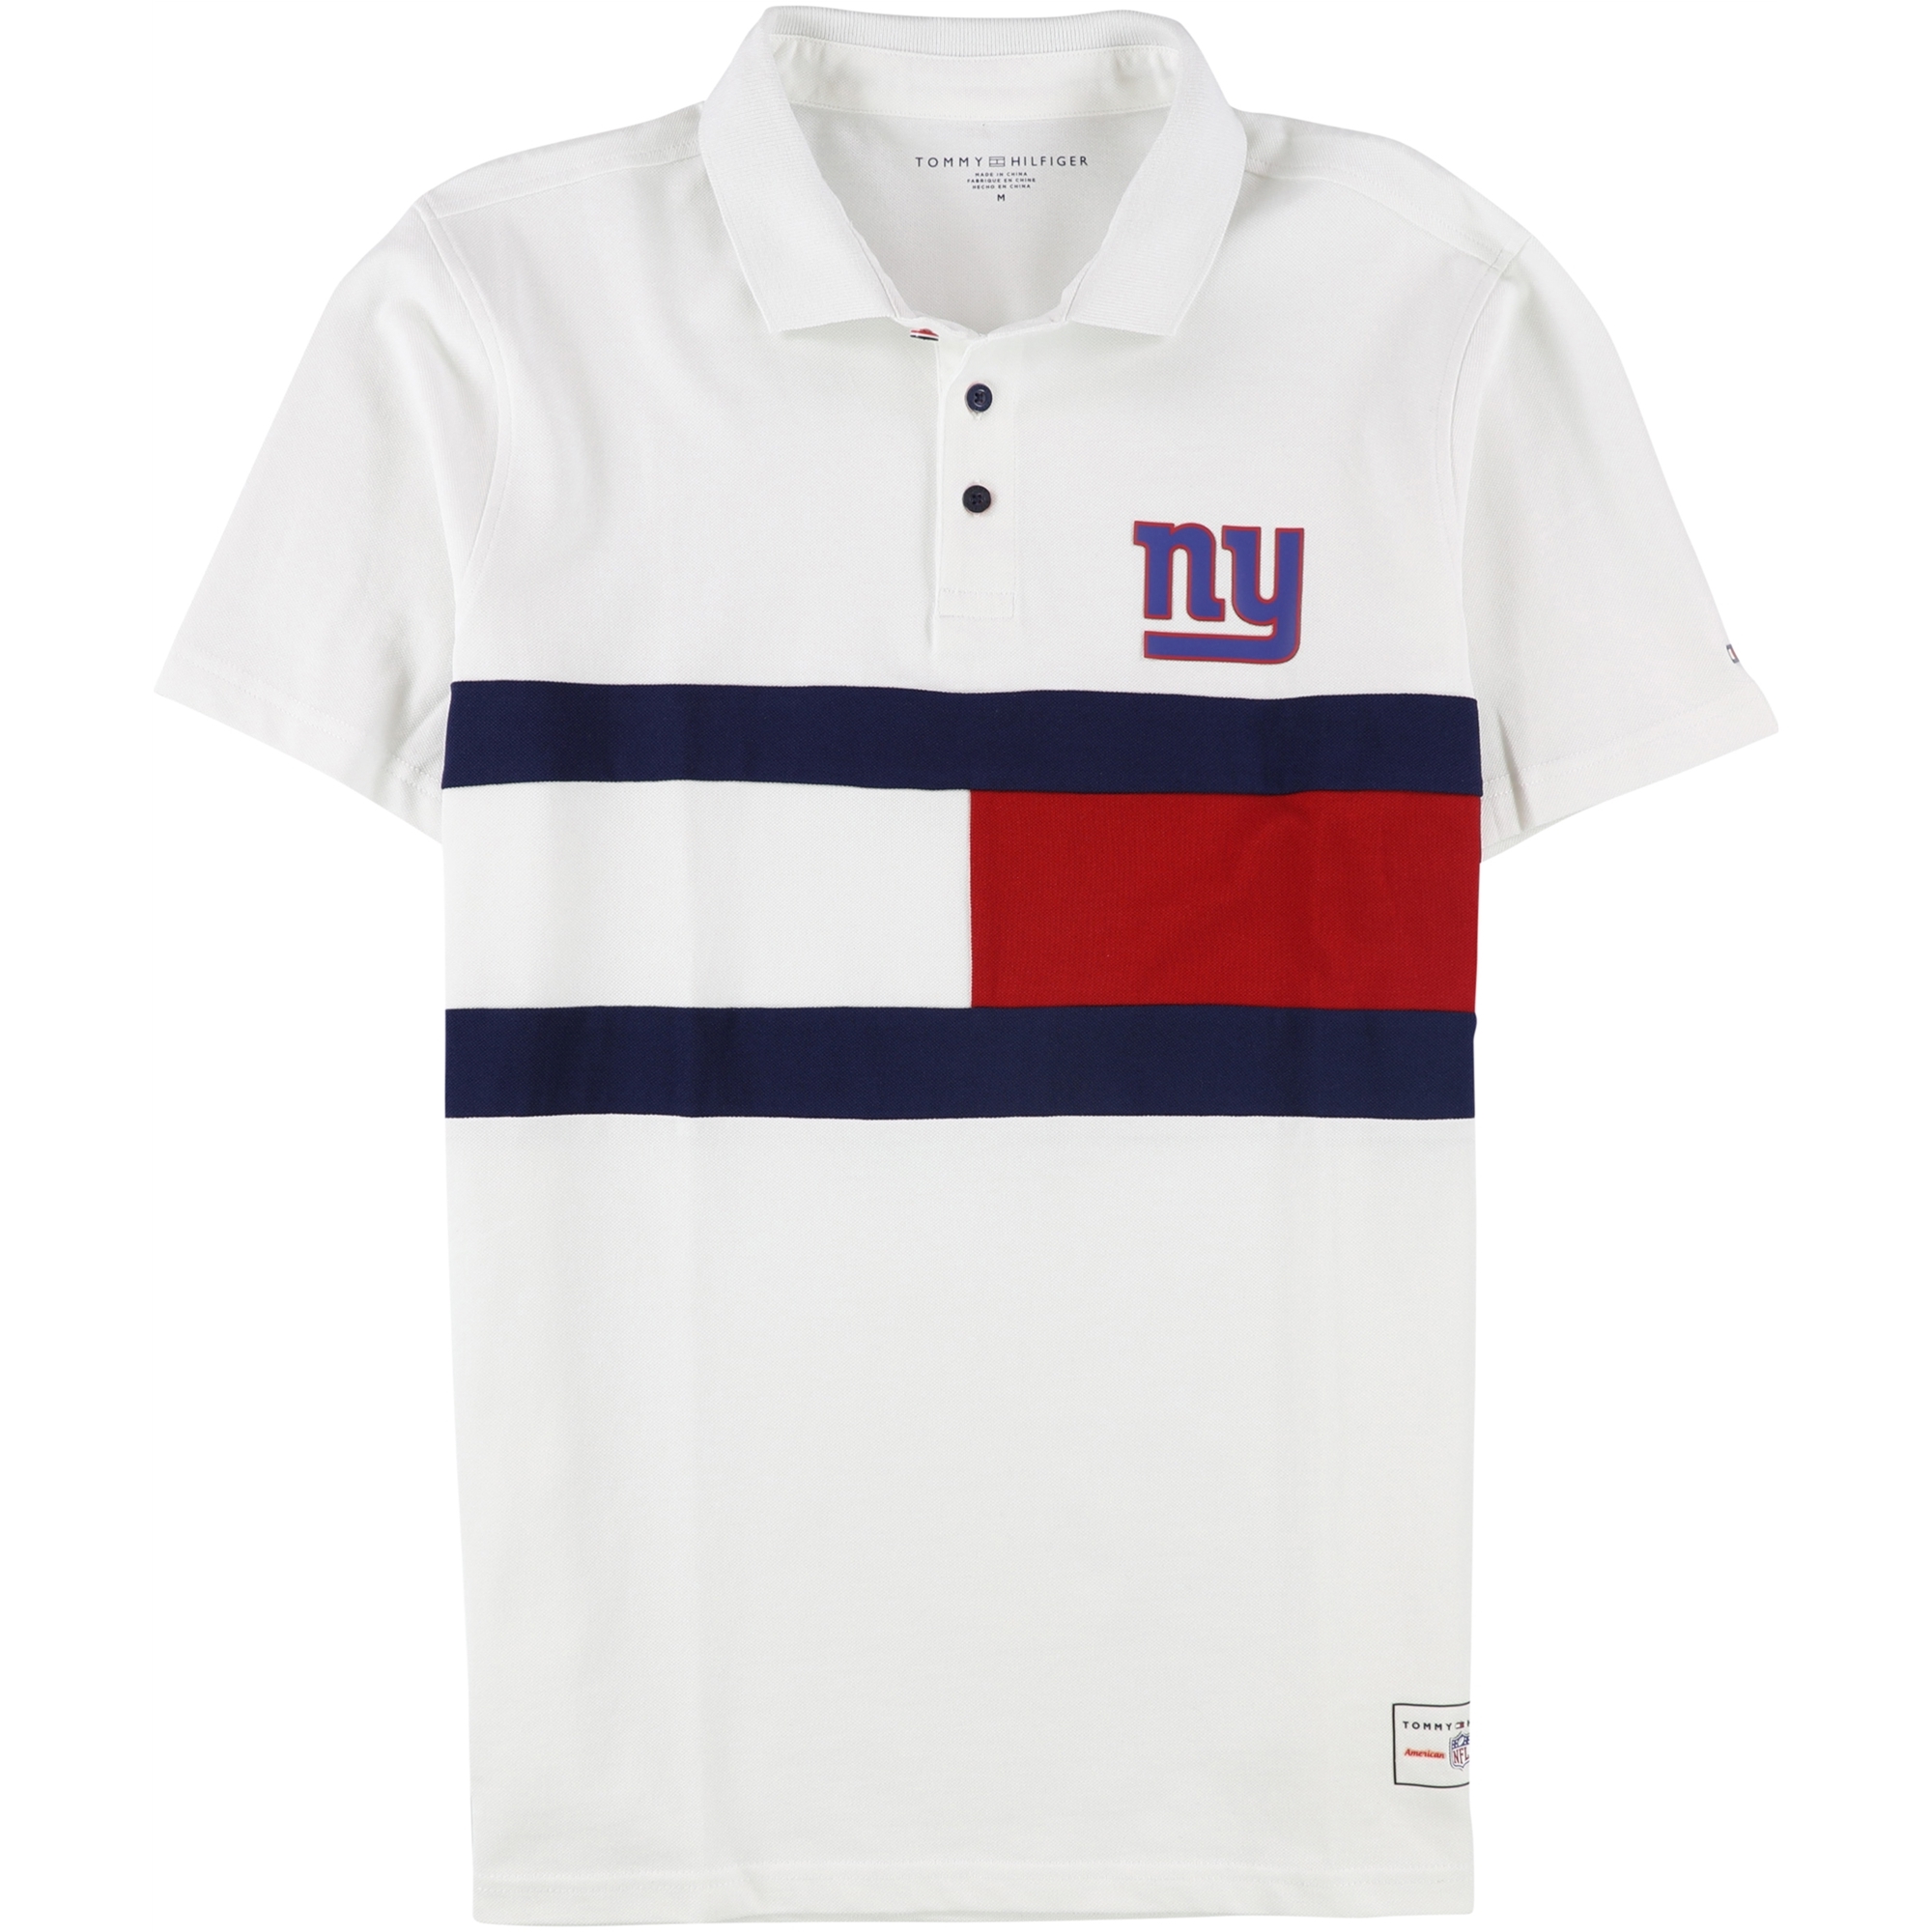 Mens Buy Tommy Giants Shirt Hilfiger New Polo Tagsweekly Rugby | York a